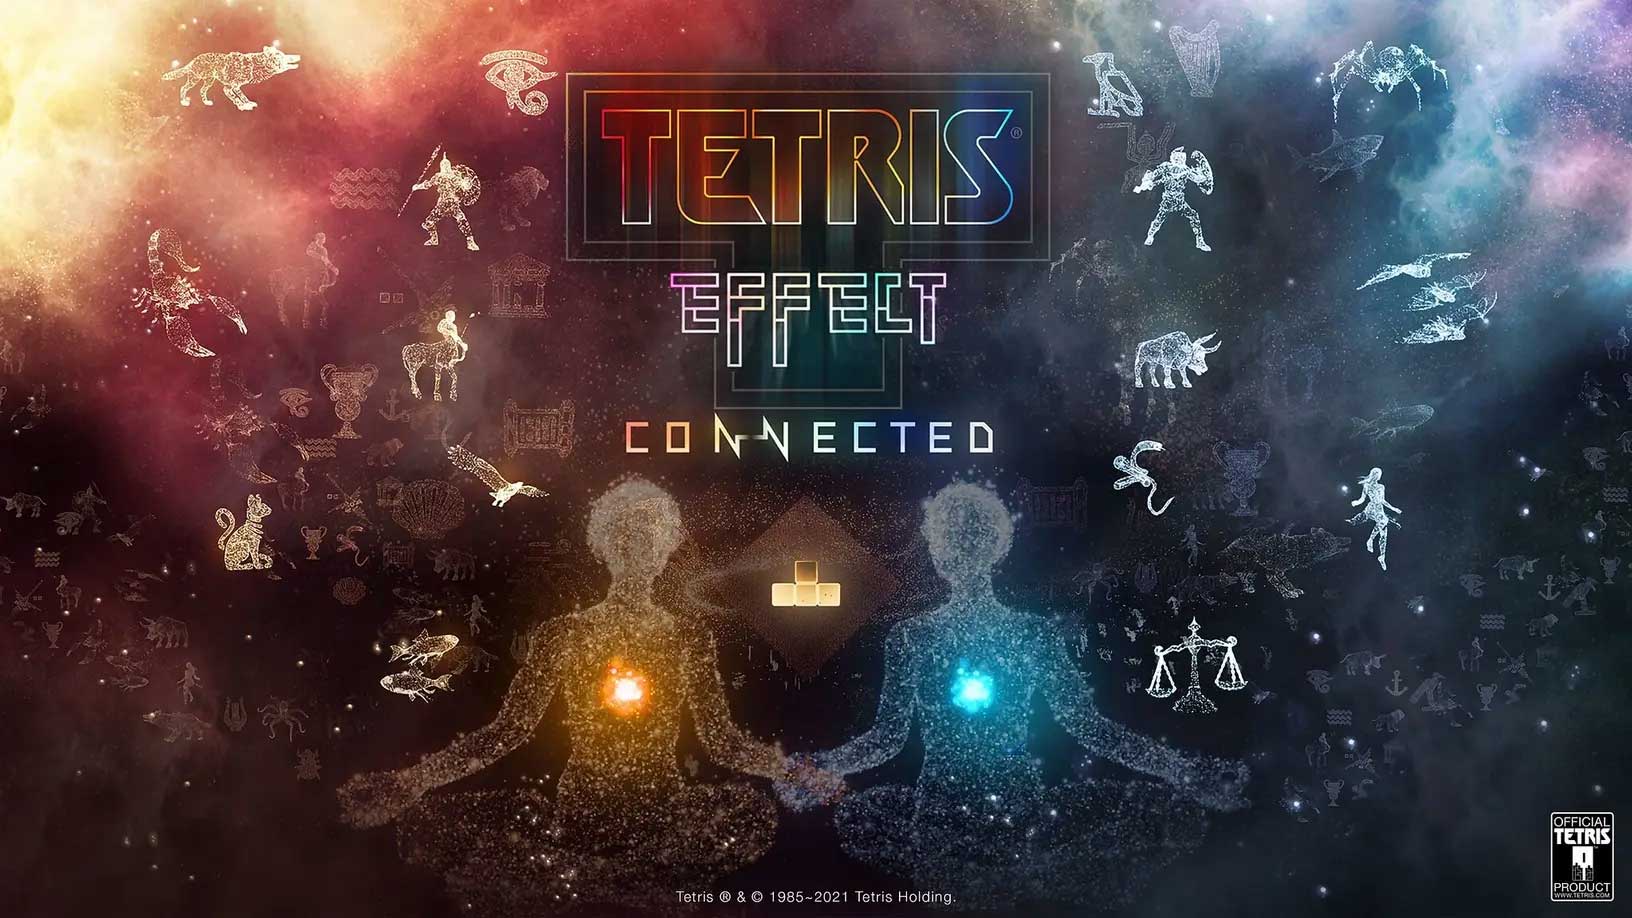 Tetris Effect: Connected cross-platform multiplayer comes to PS4 this July